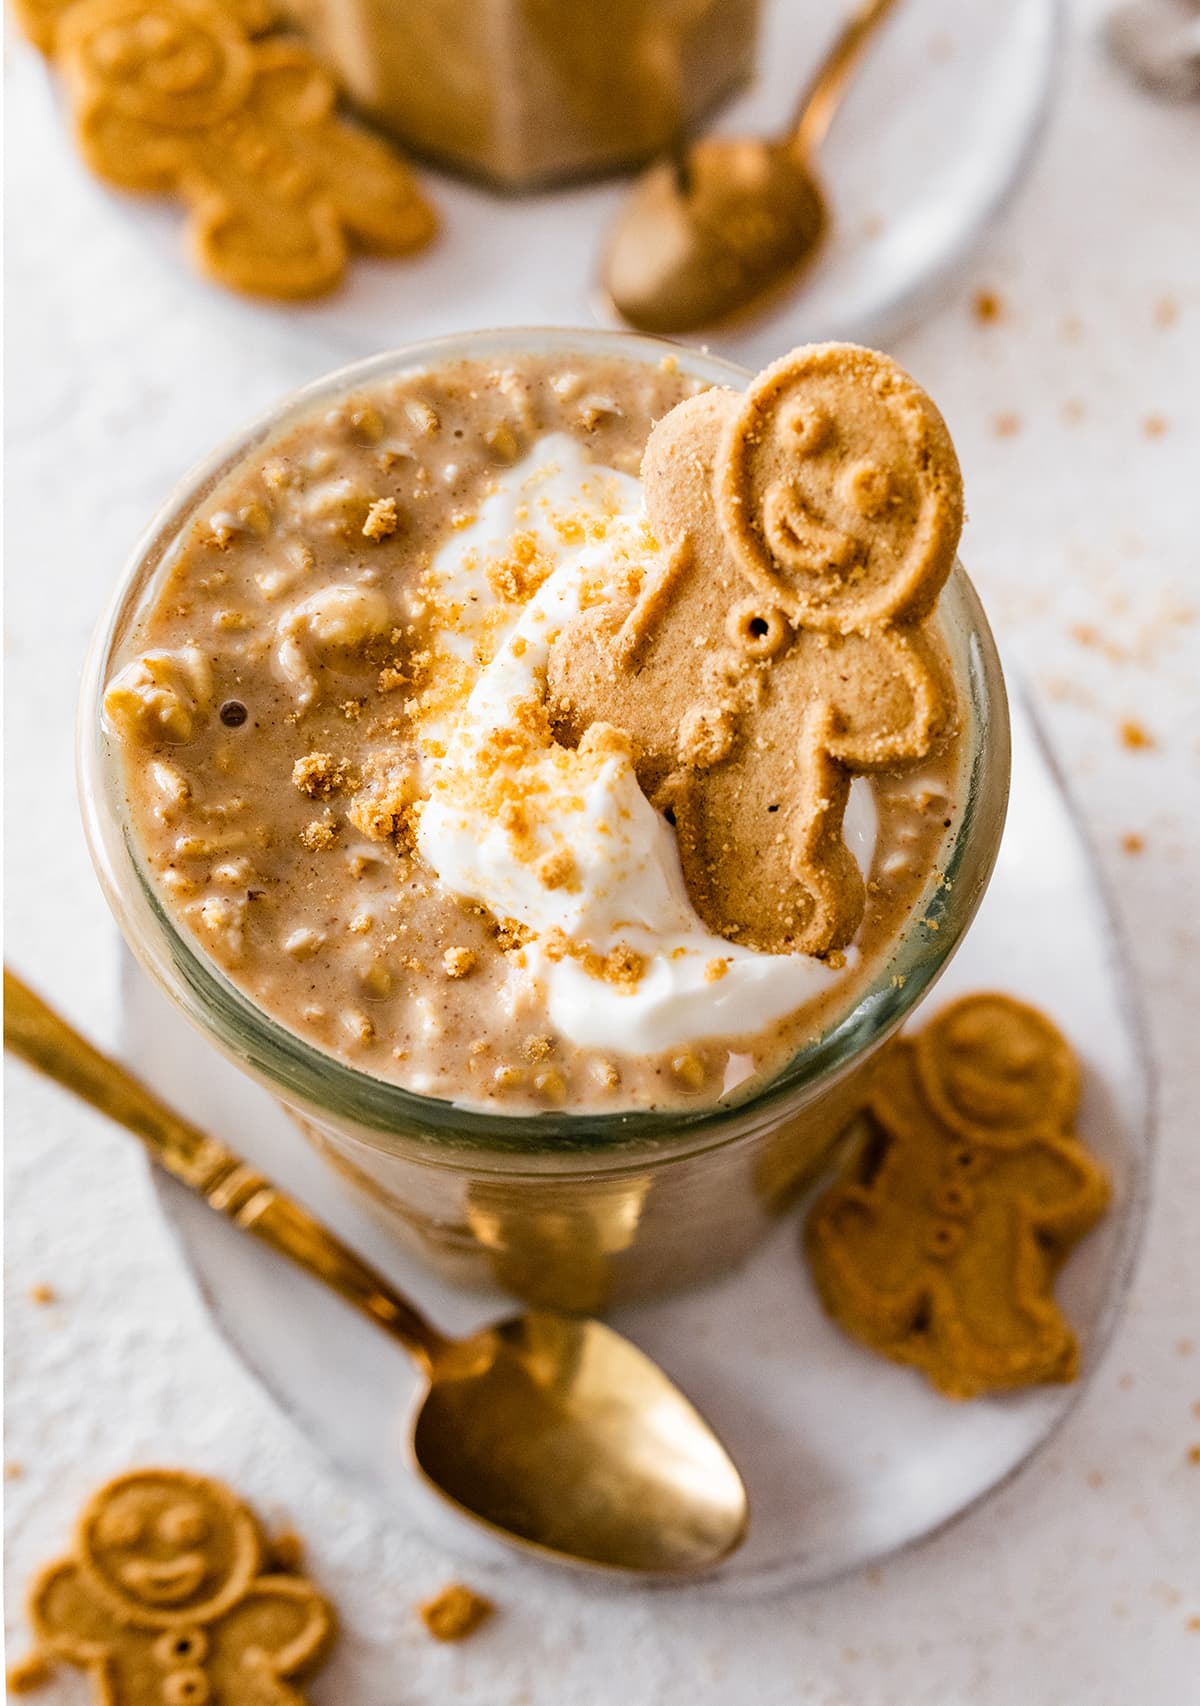 Gingerbread overnight oats in a glass cup. The overnight oats are topped with a dollop of whipped cream and a small gingerbread man.